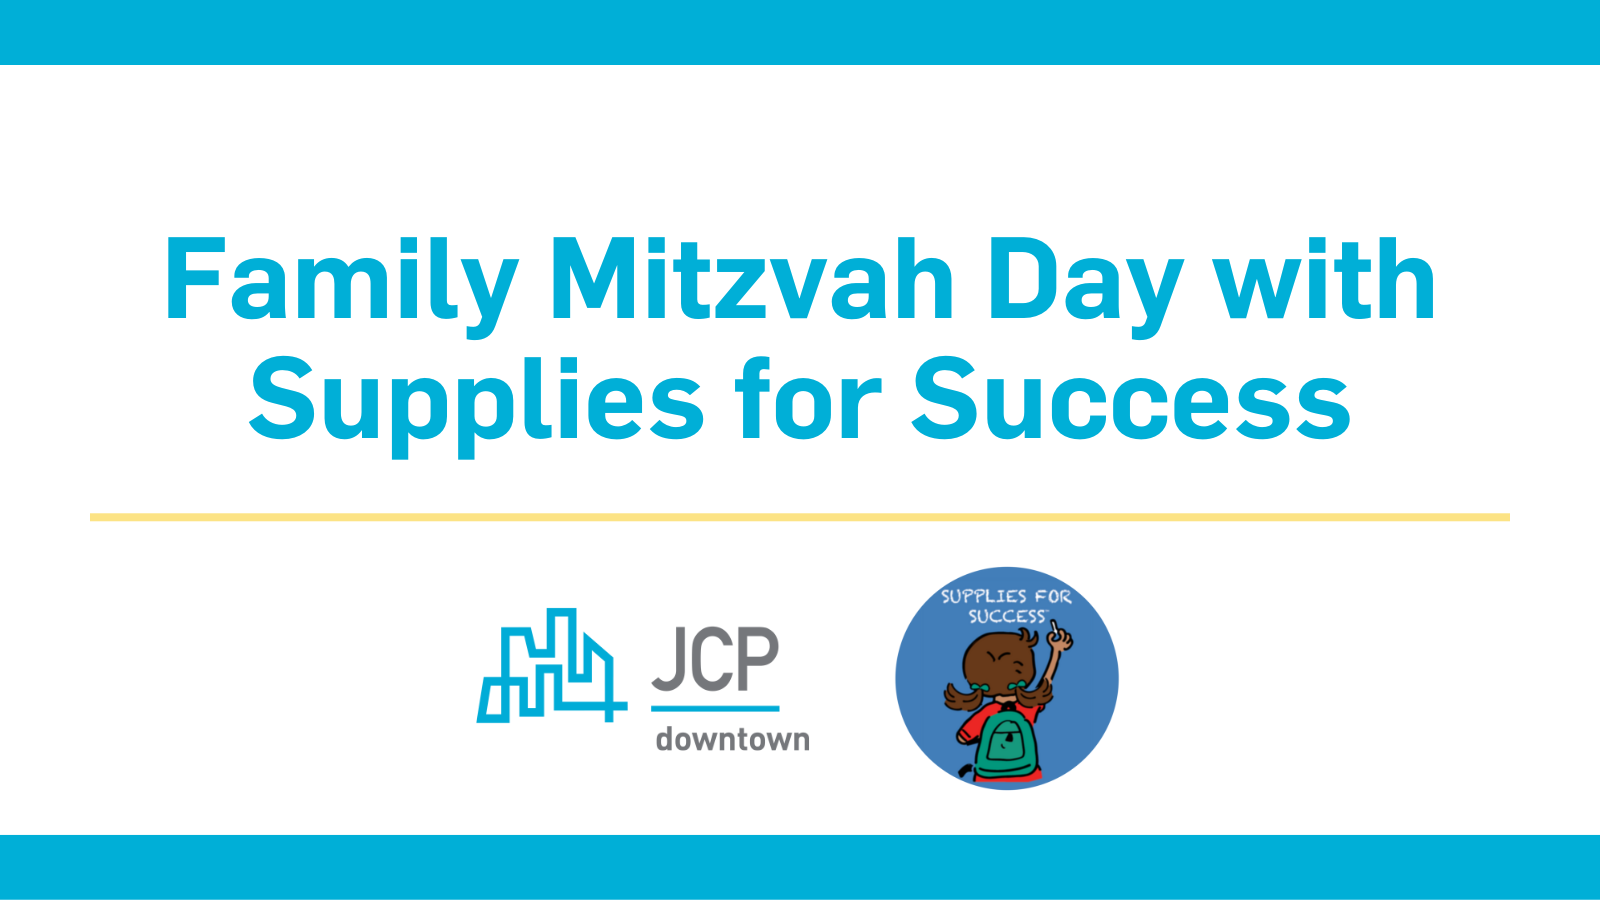 Family Mitzvah Day with Supplies for Success